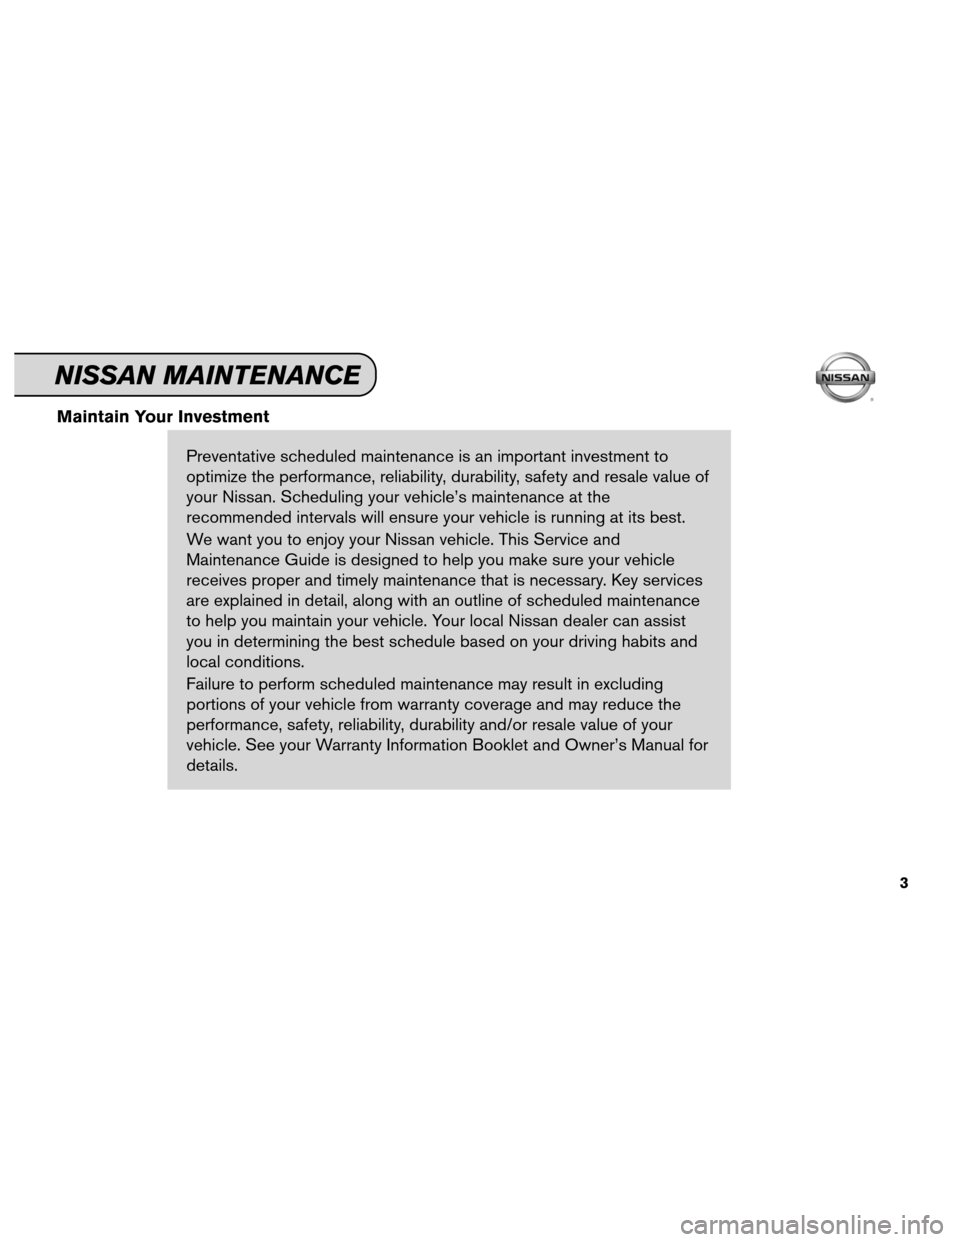 NISSAN PATHFINDER 2012 R52 / 4.G Service And Maintenance Guide Maintain Your InvestmentPreventative scheduled maintenance is an important investment to
optimize the performance, reliability, durability, safety and resale value of
your Nissan. Scheduling your vehi